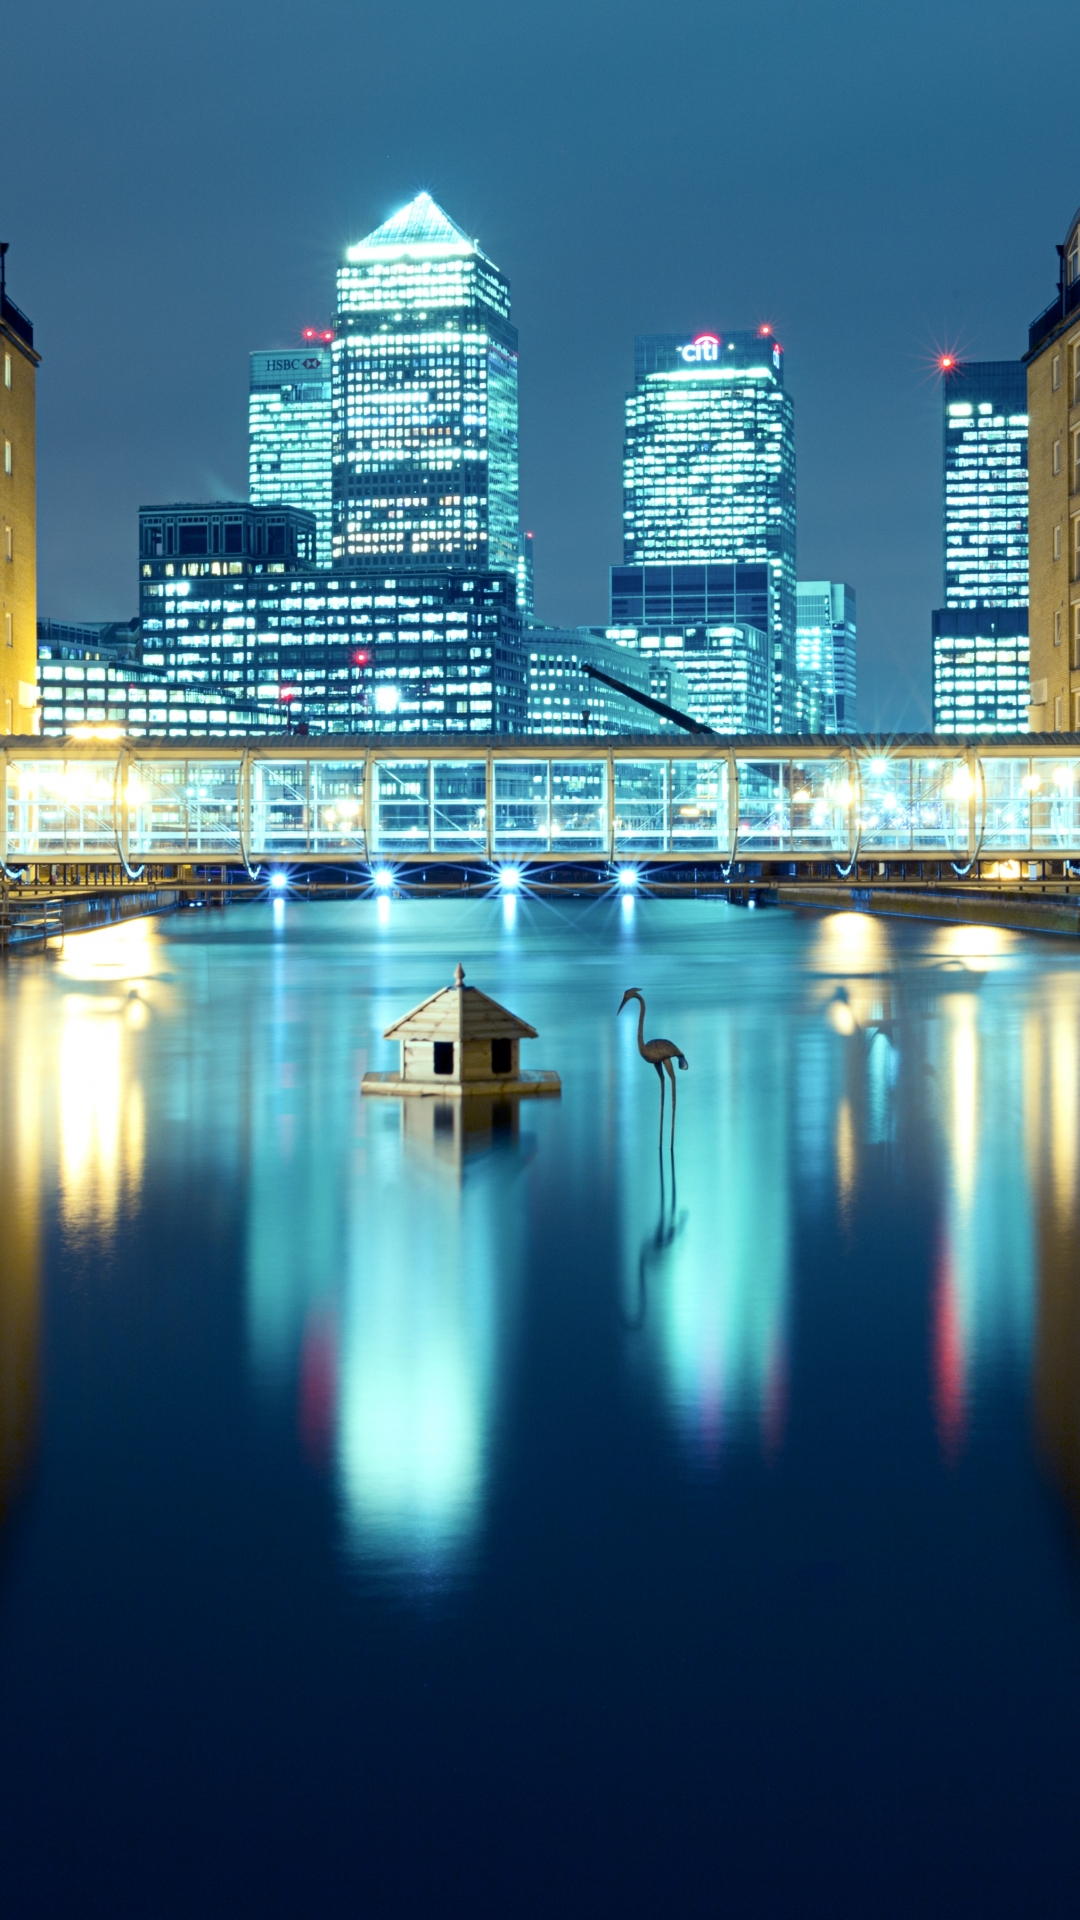 man made, london, wharf, reflection, england, light, building, night, cities wallpaper for mobile